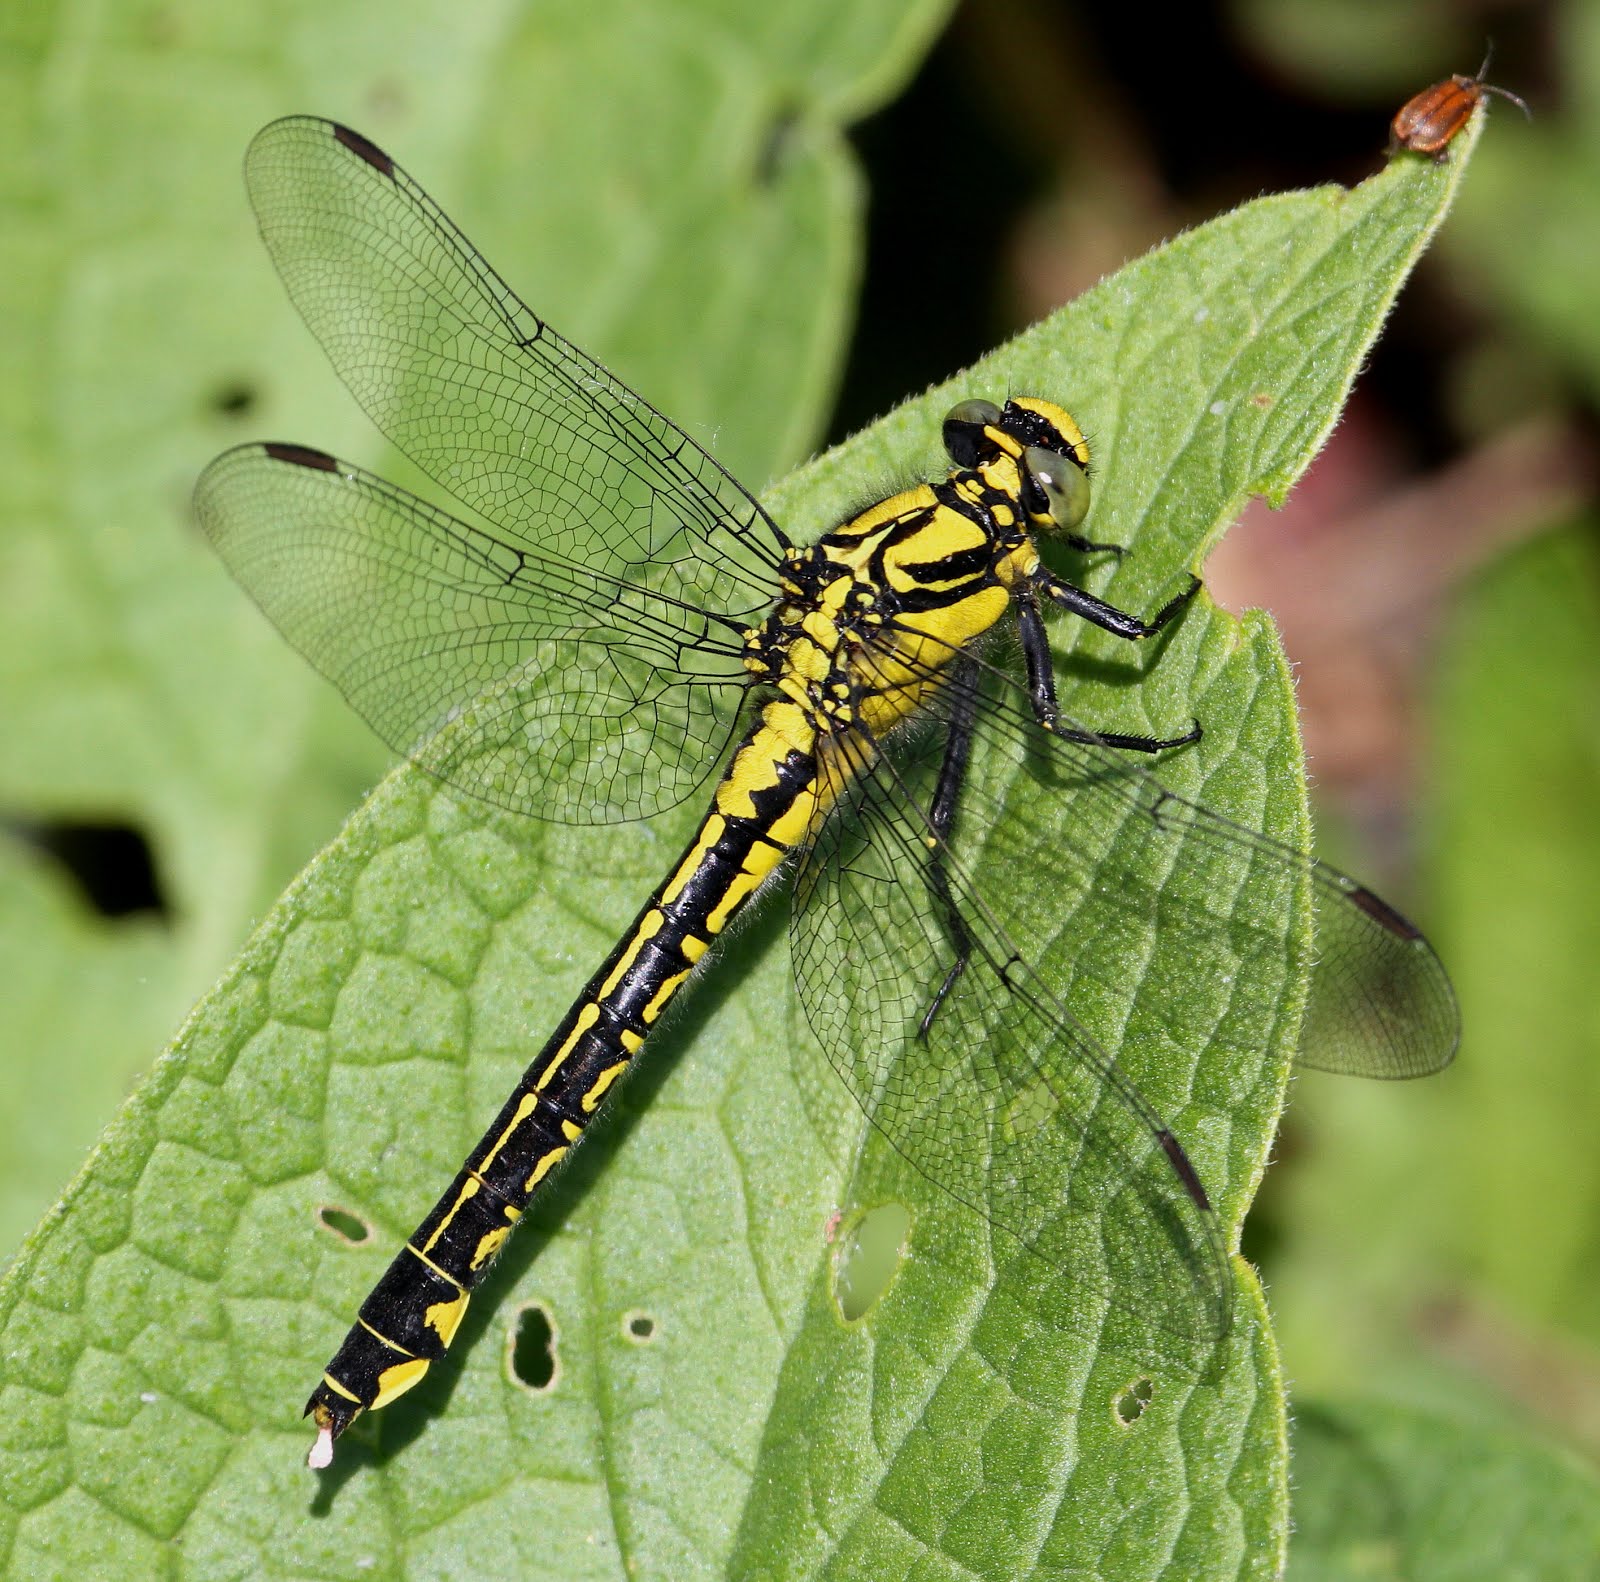 CLUB-TAILED DRAGONFLY